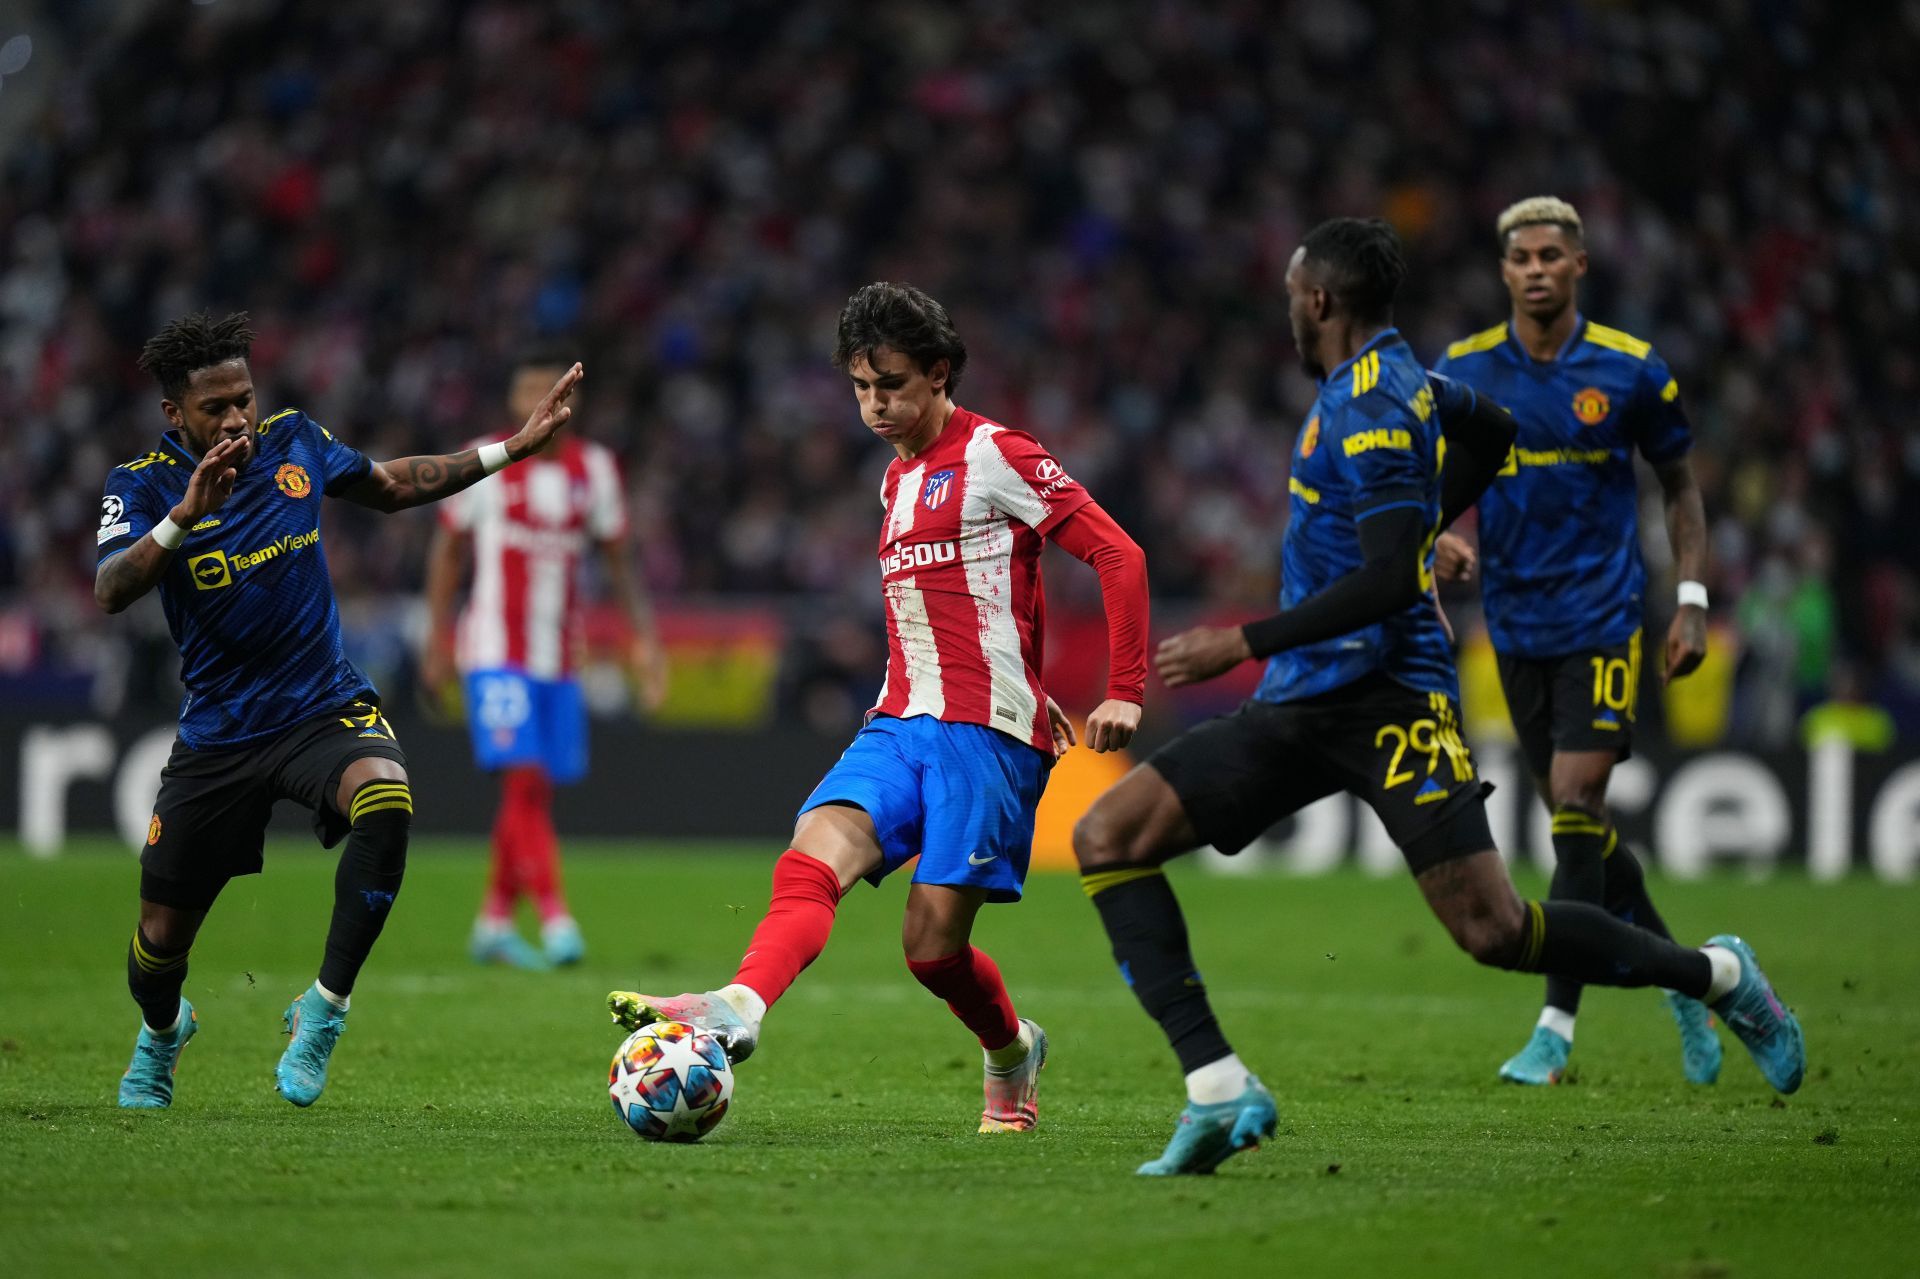 Manchester United played out a 1-1 draw with Atletico Madrid in the Champions League on Wednesday.